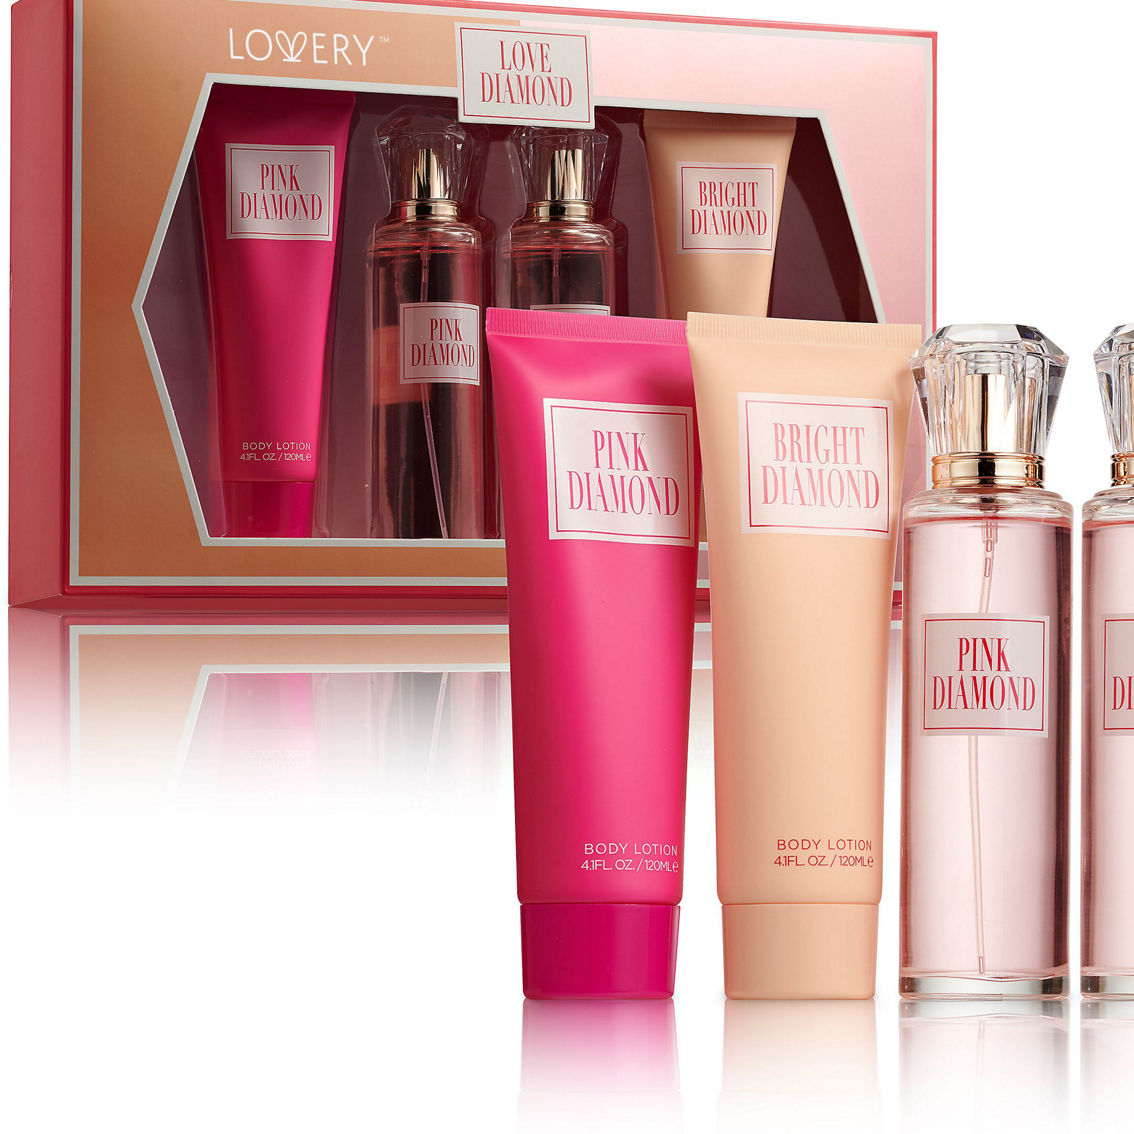 Lovery Pink Diamonds Deluxe 4 pc Home Spa Gift Set - Bath and Body Selfcare - Image 2 of 3